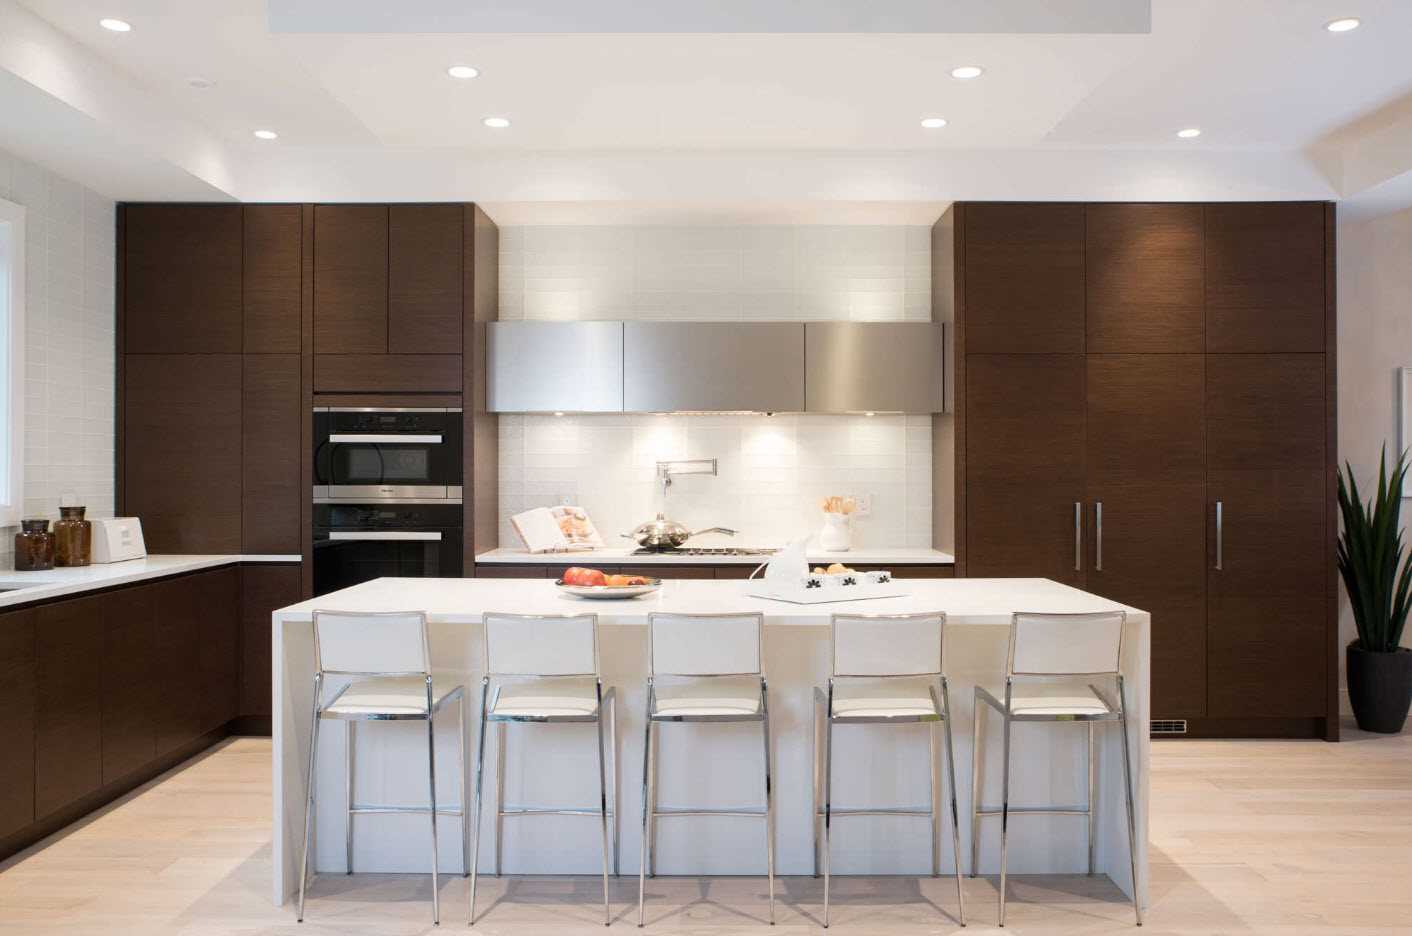 variant of a beautiful kitchen interior